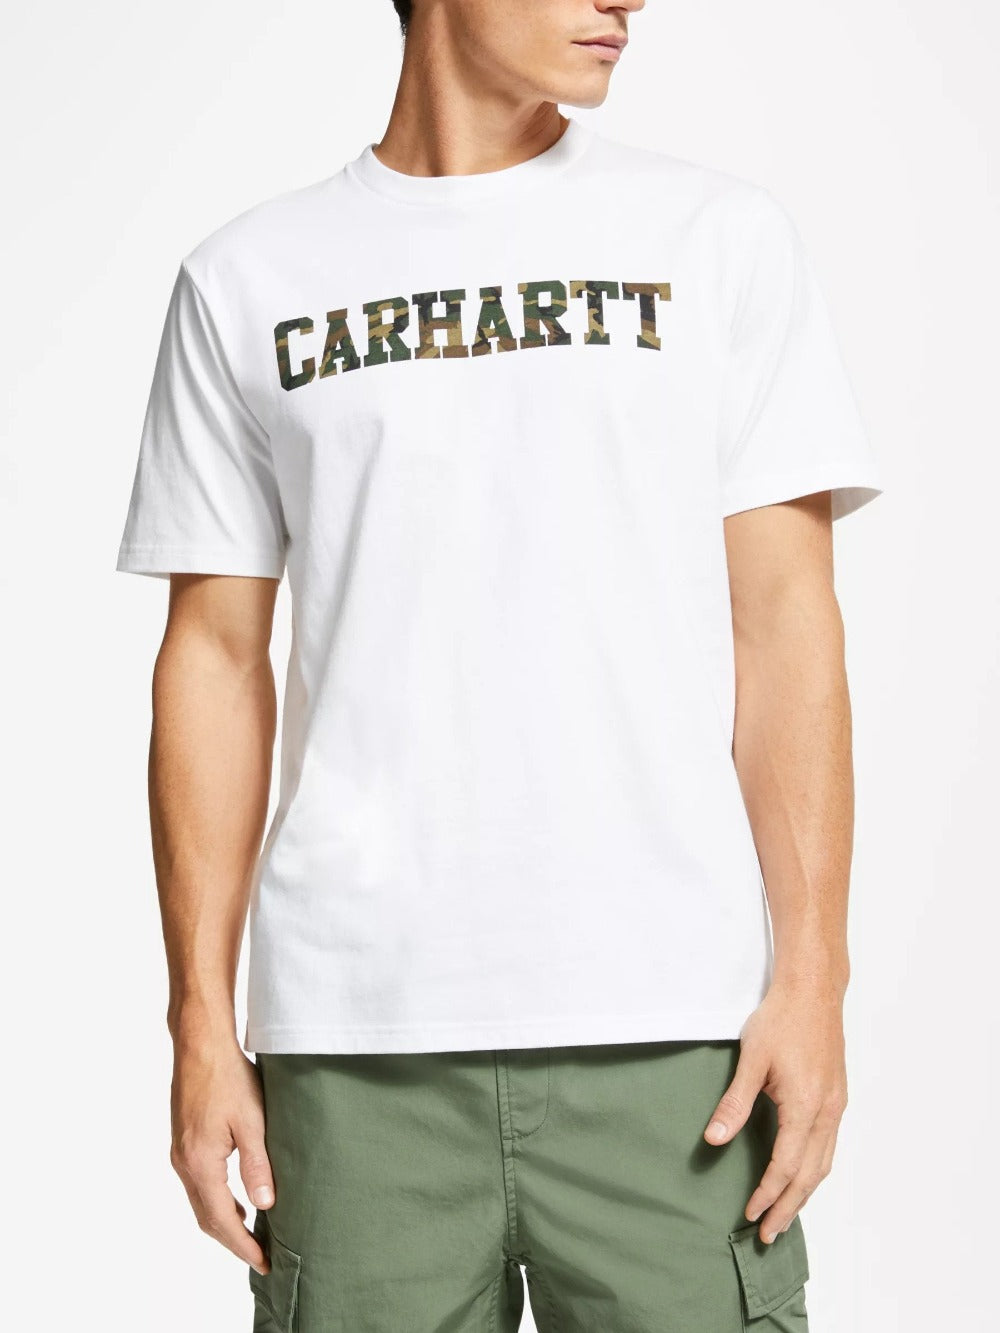 Carhartt WIP S/S College T-Shirt White/Camo | Hype Vault Kuala Lumpur | Asia's Top Trusted High-End Sneakers and Streetwear Store